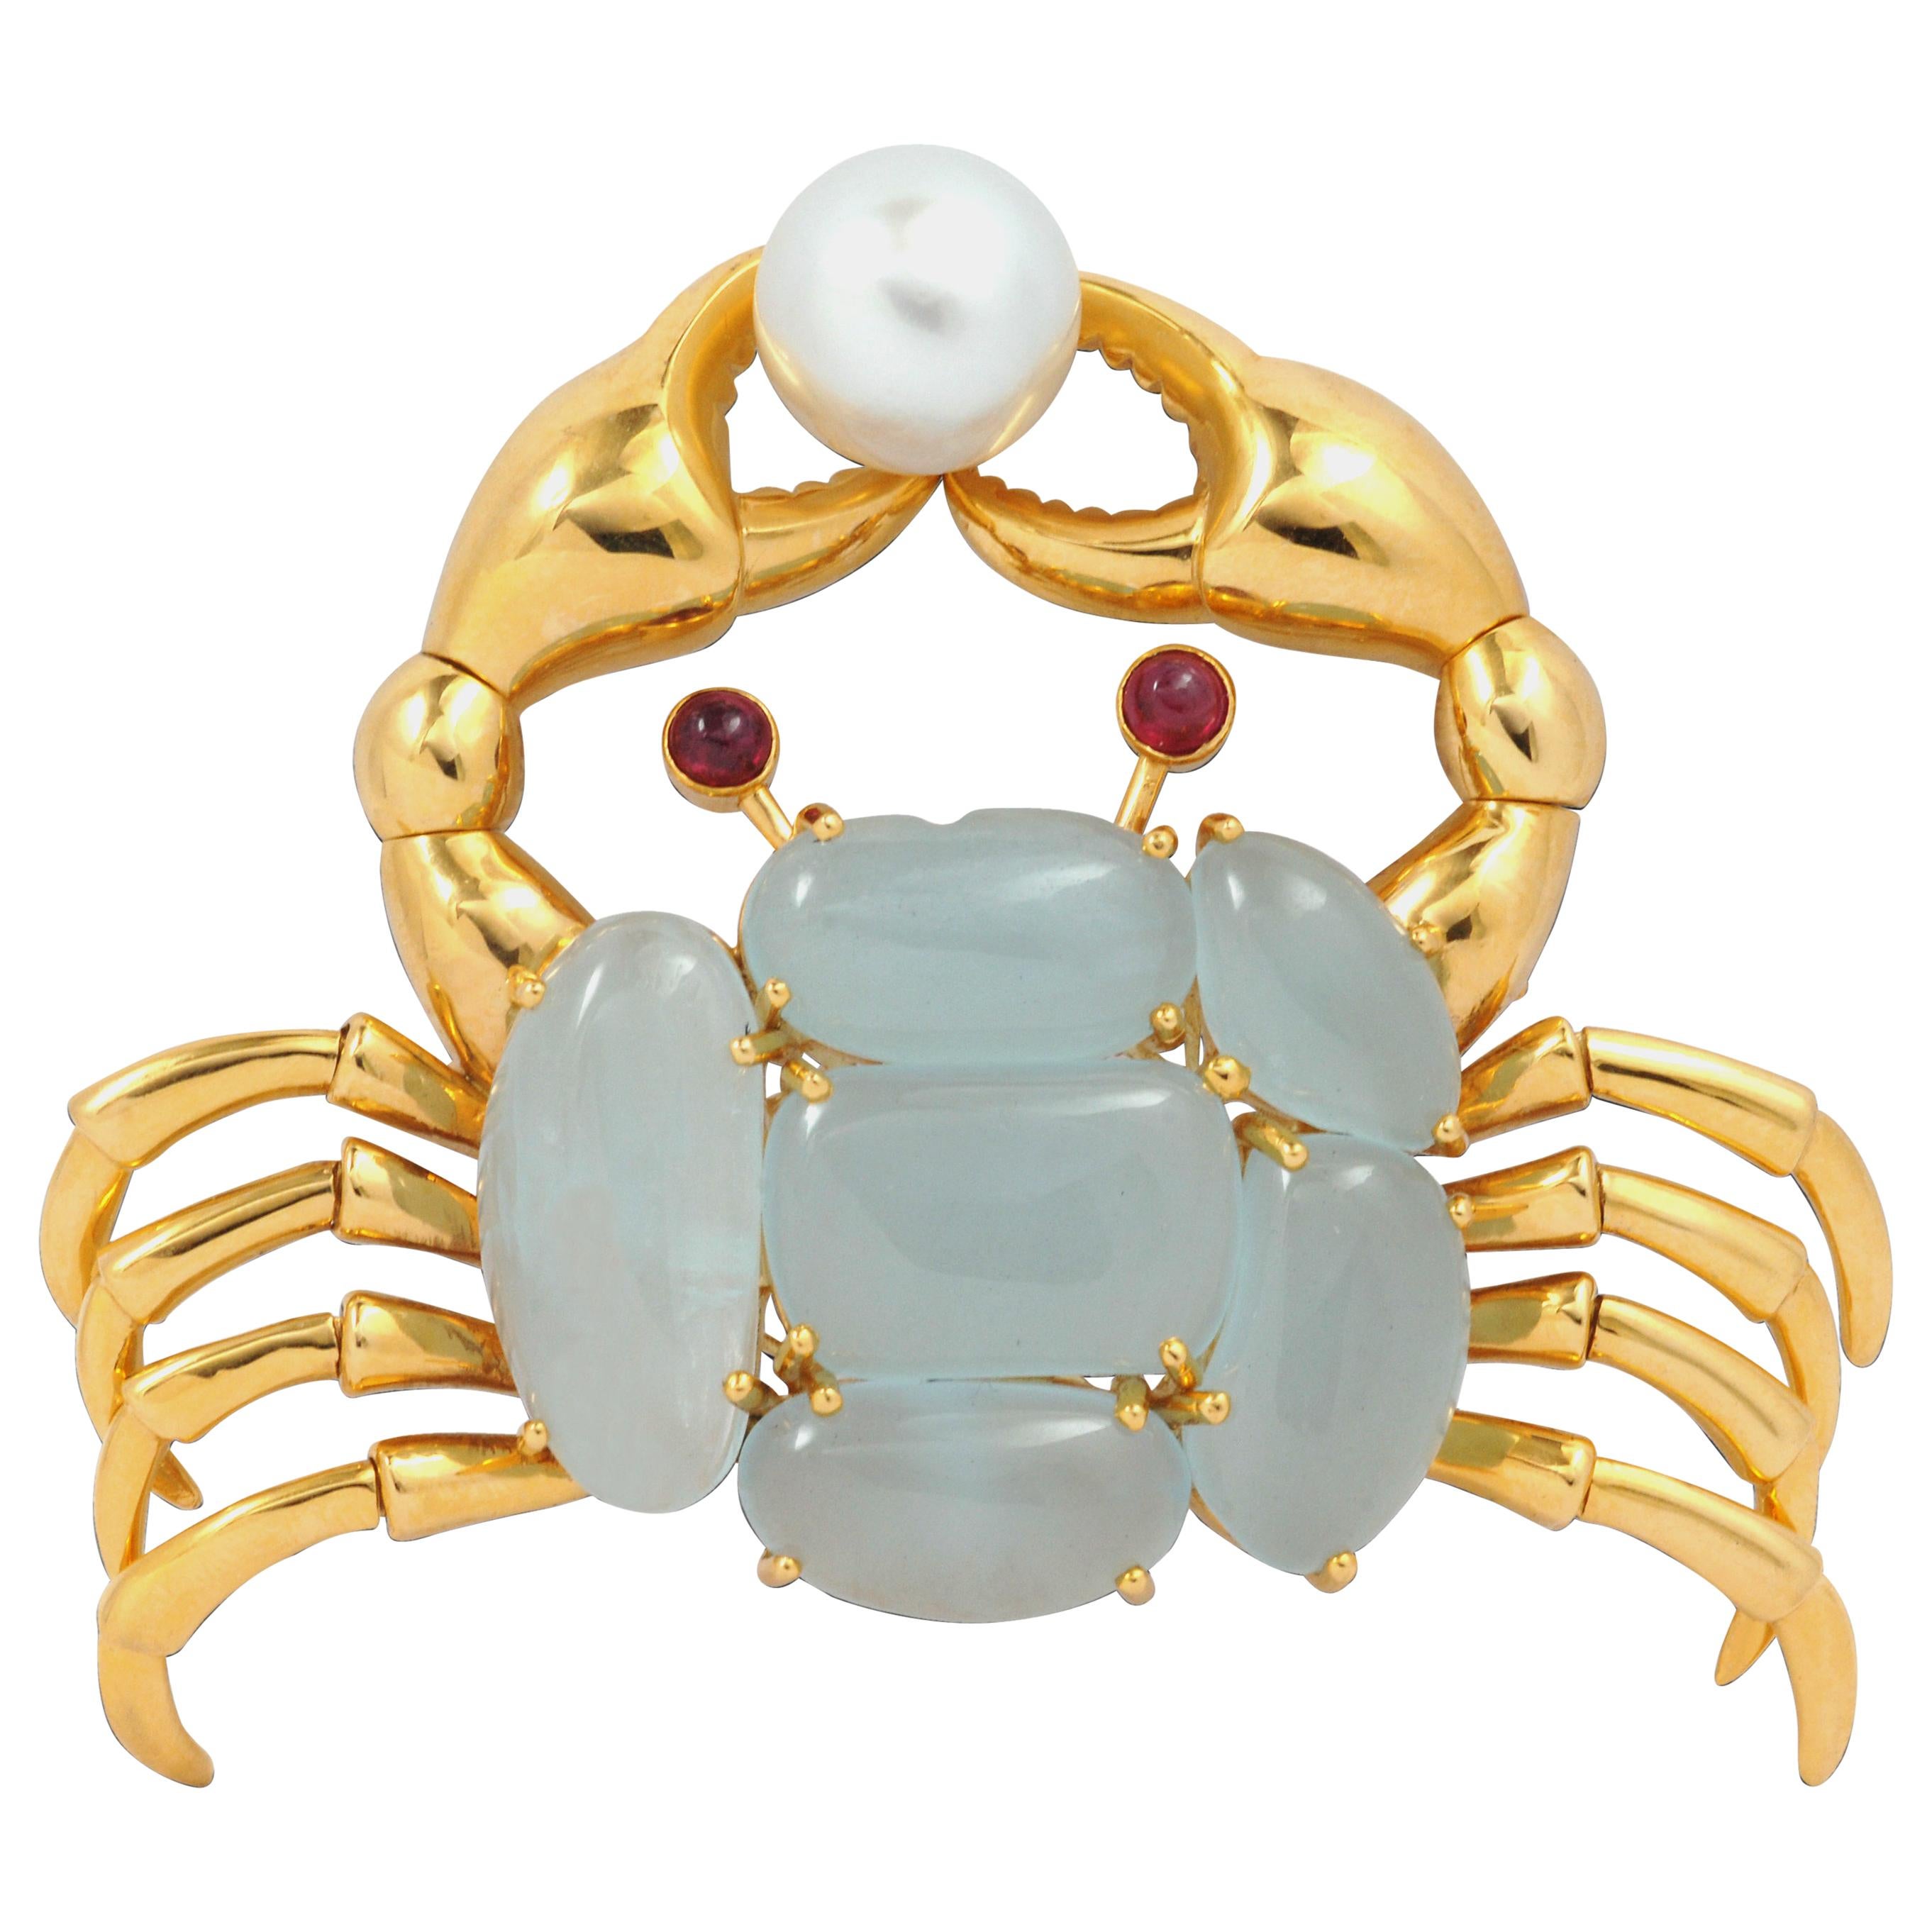 Cabuchon Aquamarine with Ruby and Pearl Crab Brooch Set in 18K Gold Settings